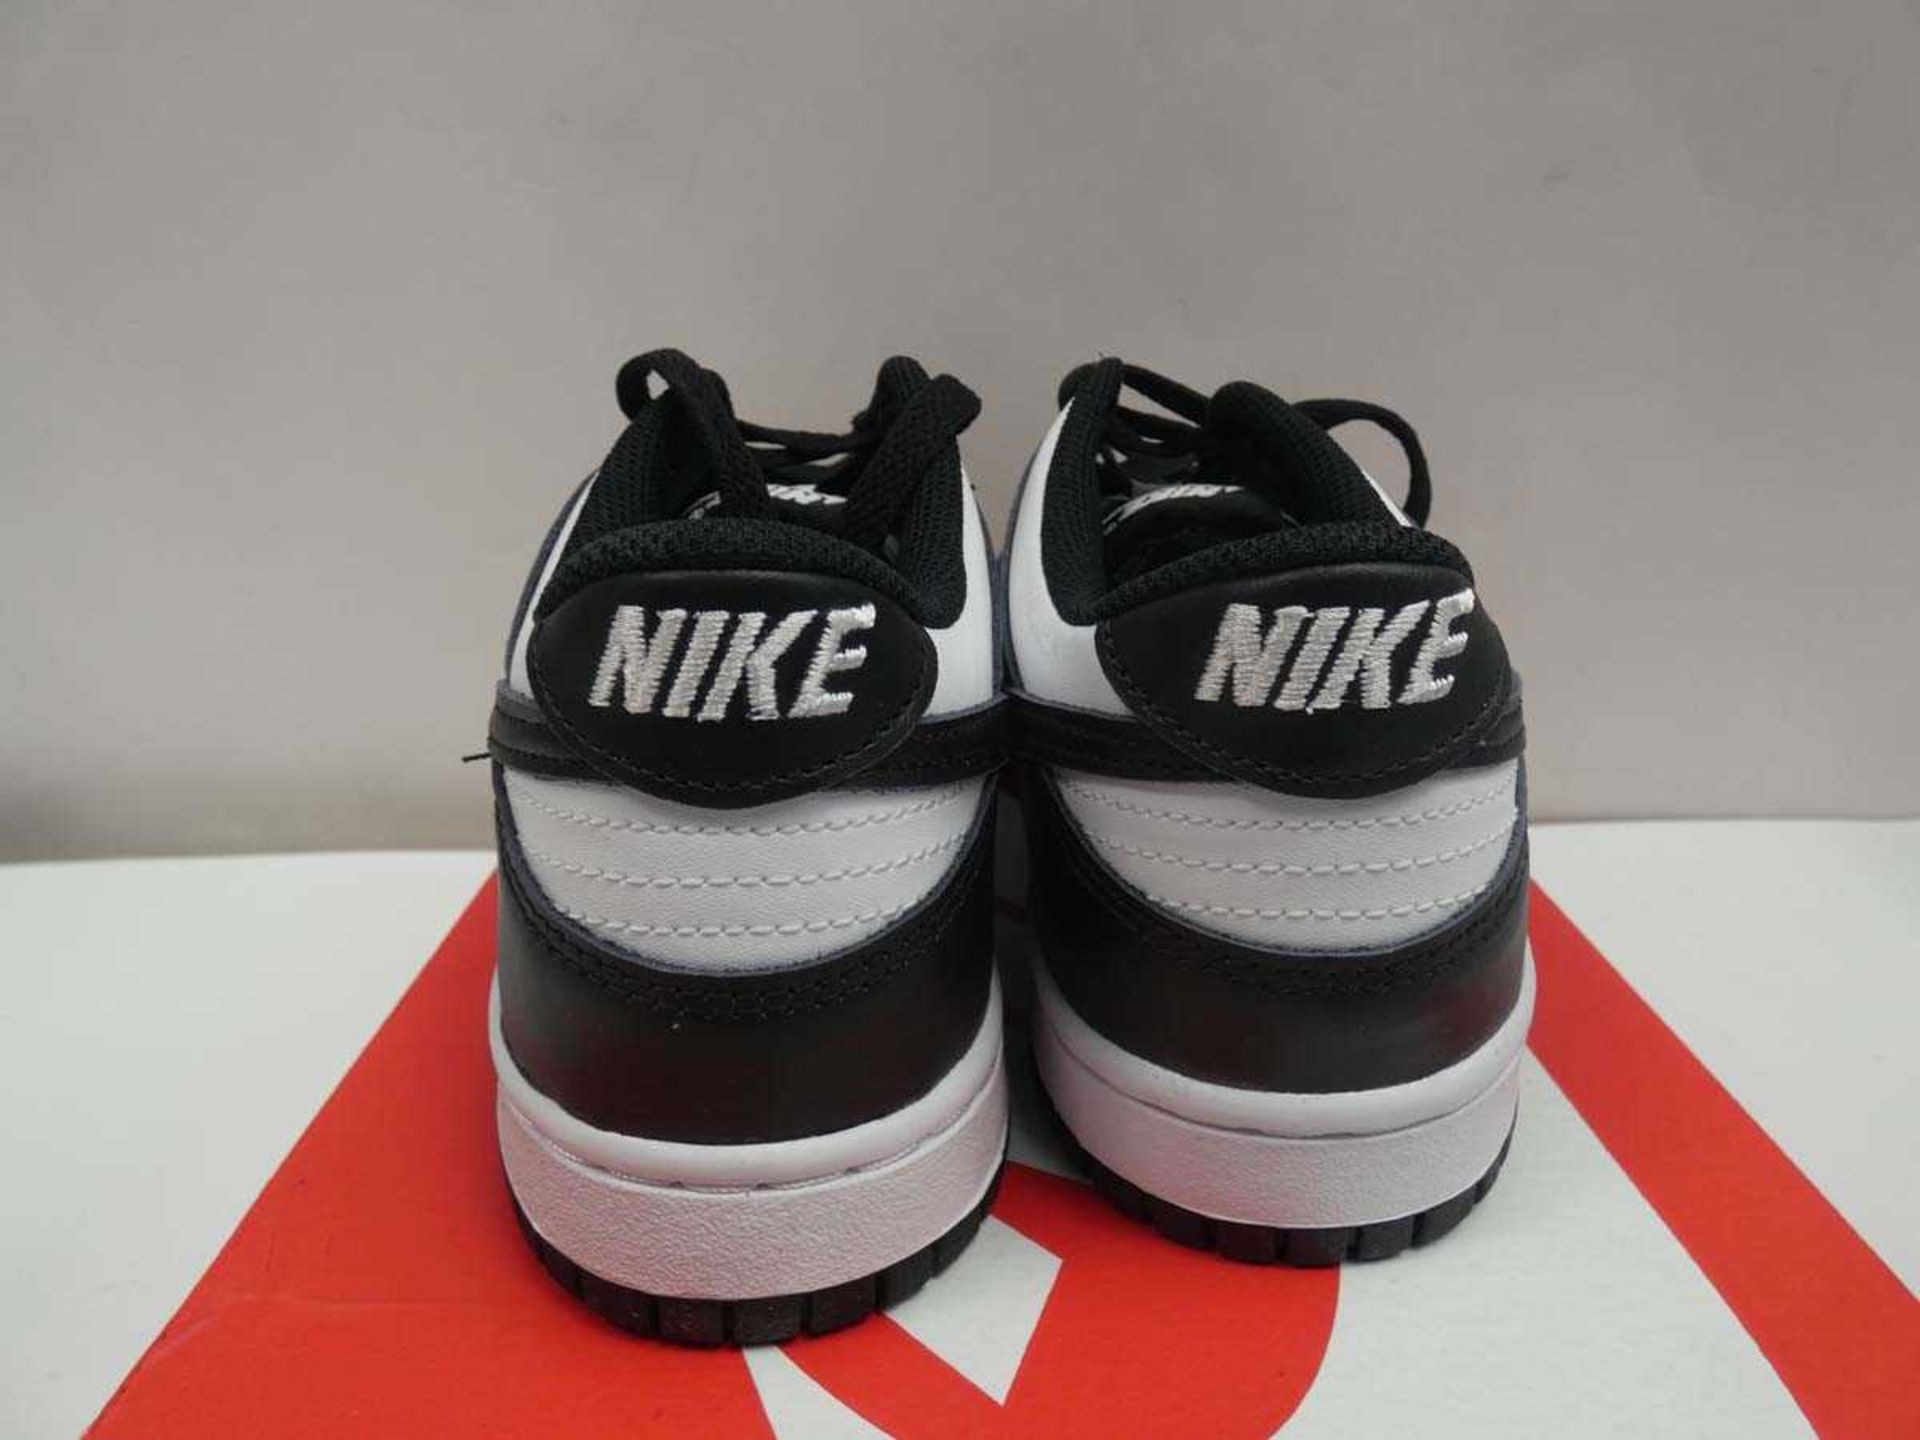 Nike Dunk Low Retro Black White childrens shoes size 5.5 - Image 3 of 3